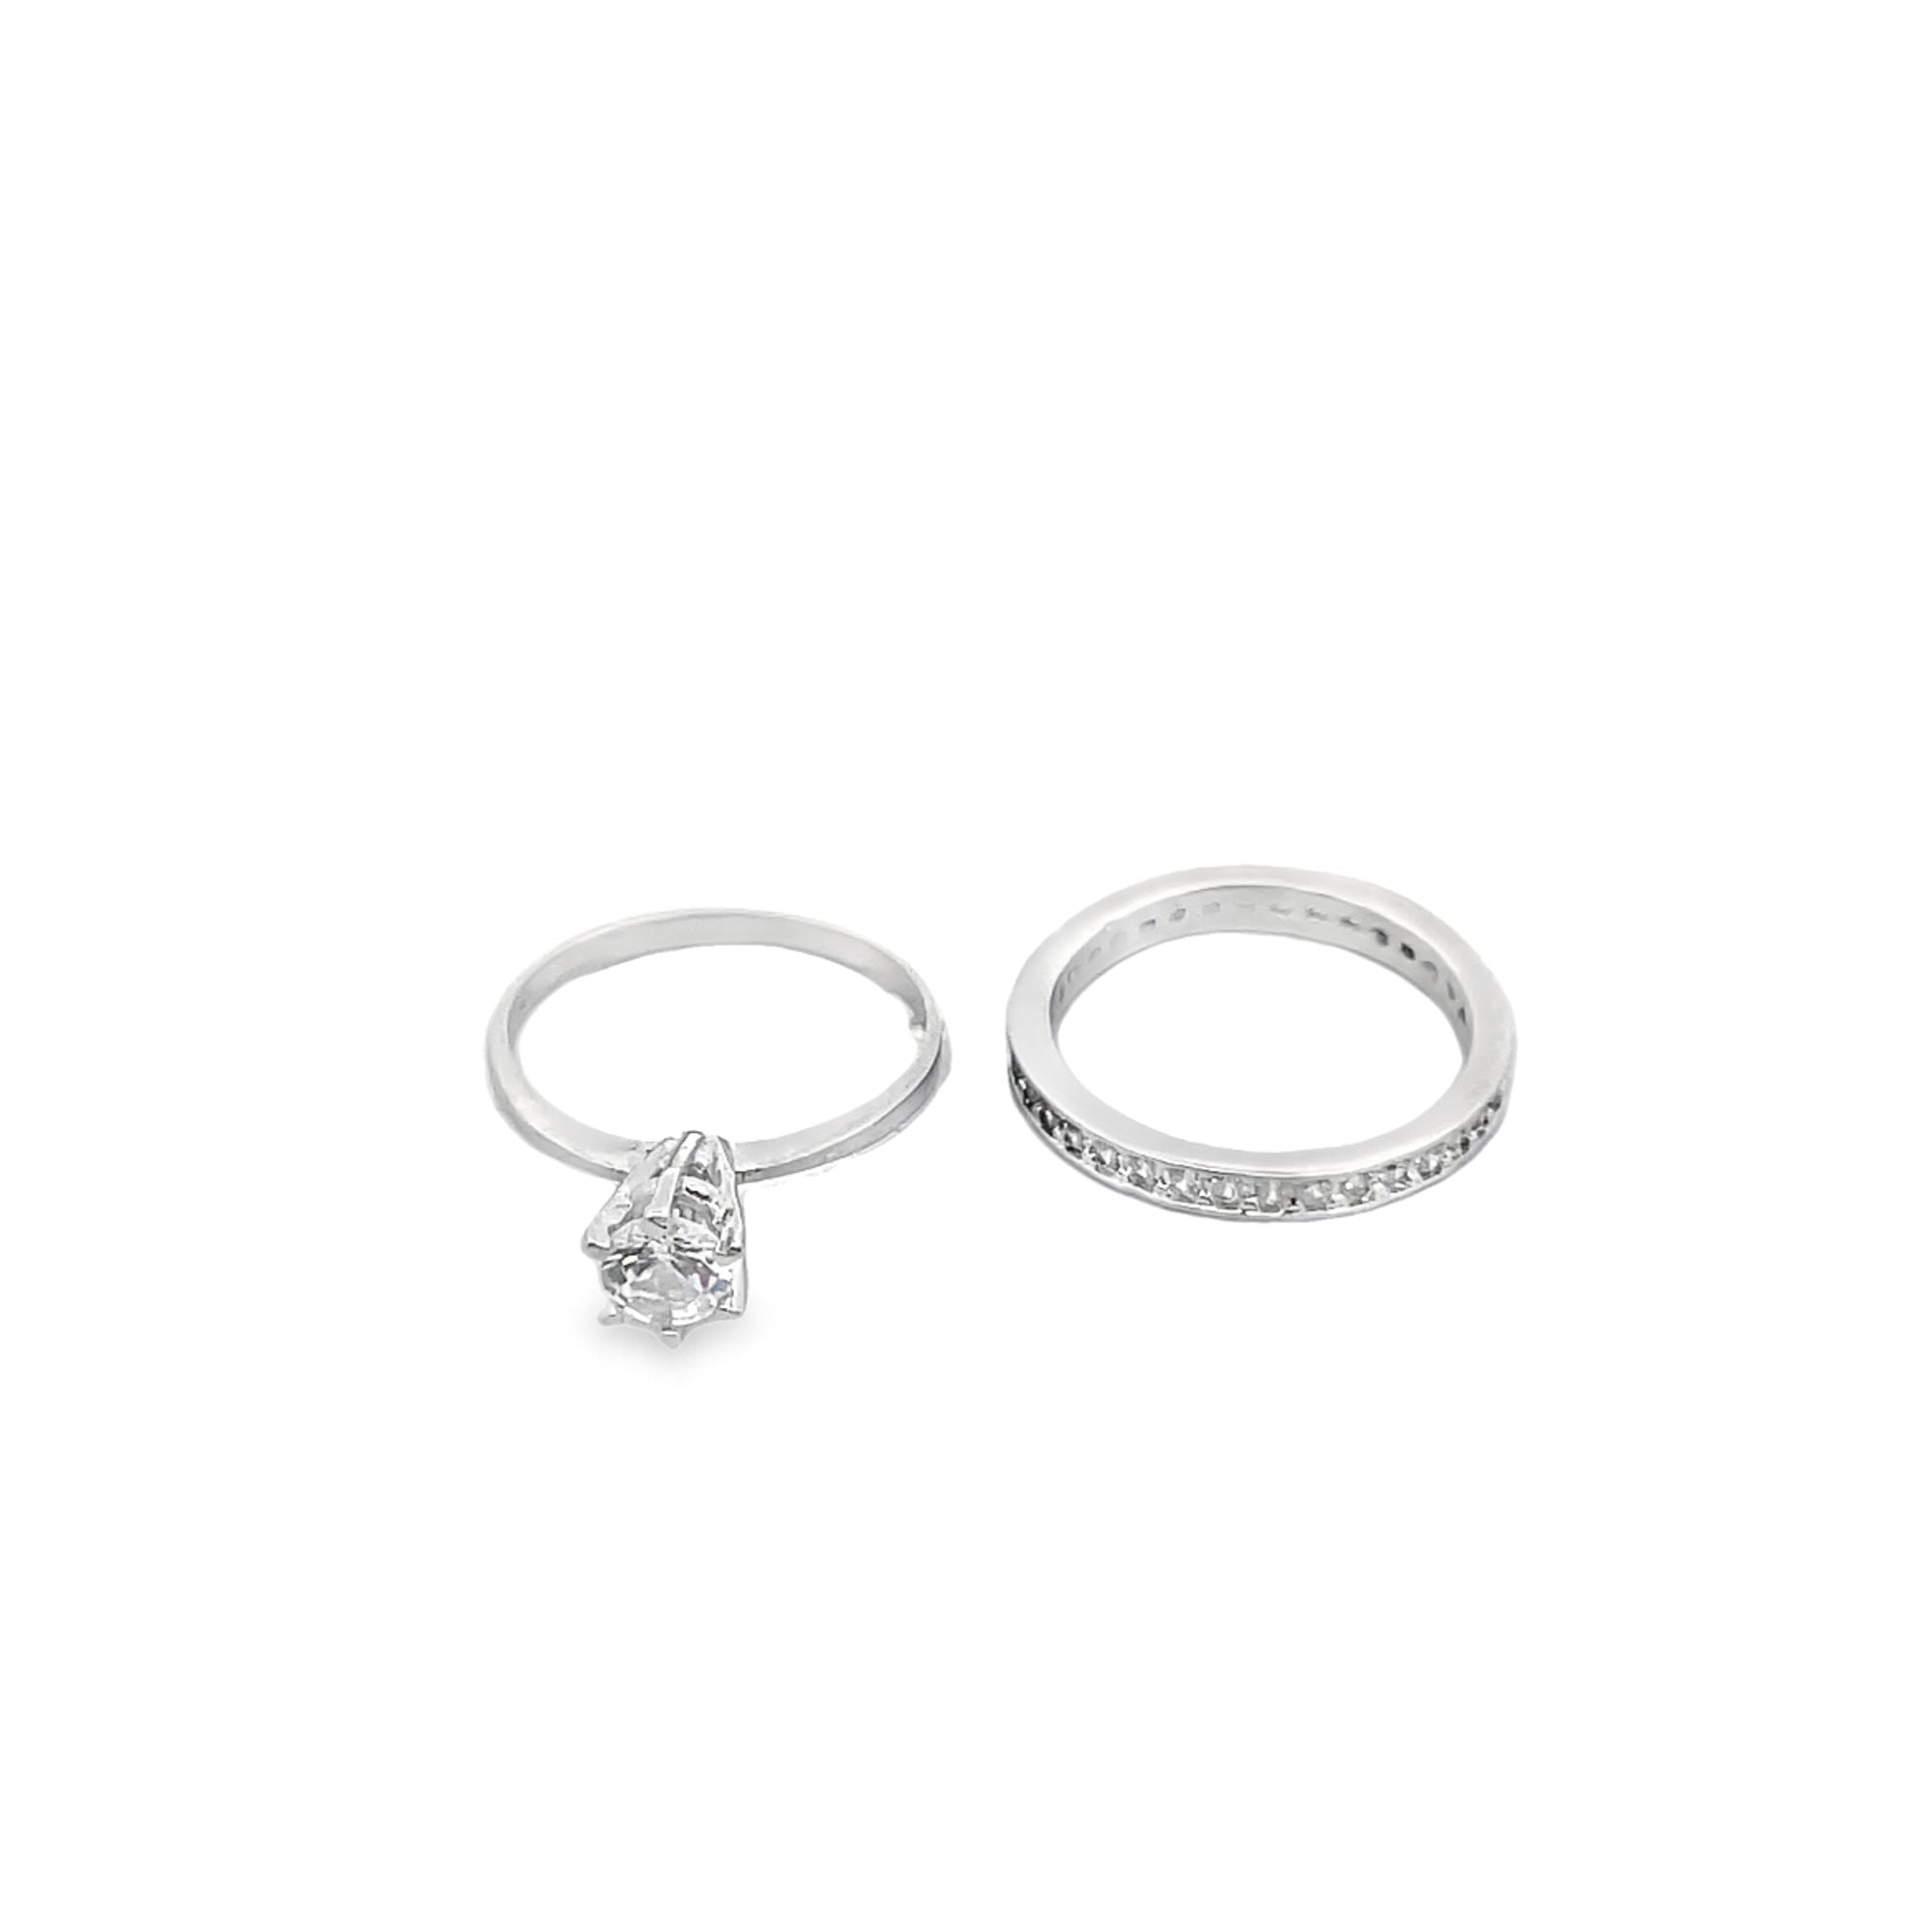 Wedding Band and Engagement Ring Set (D112)